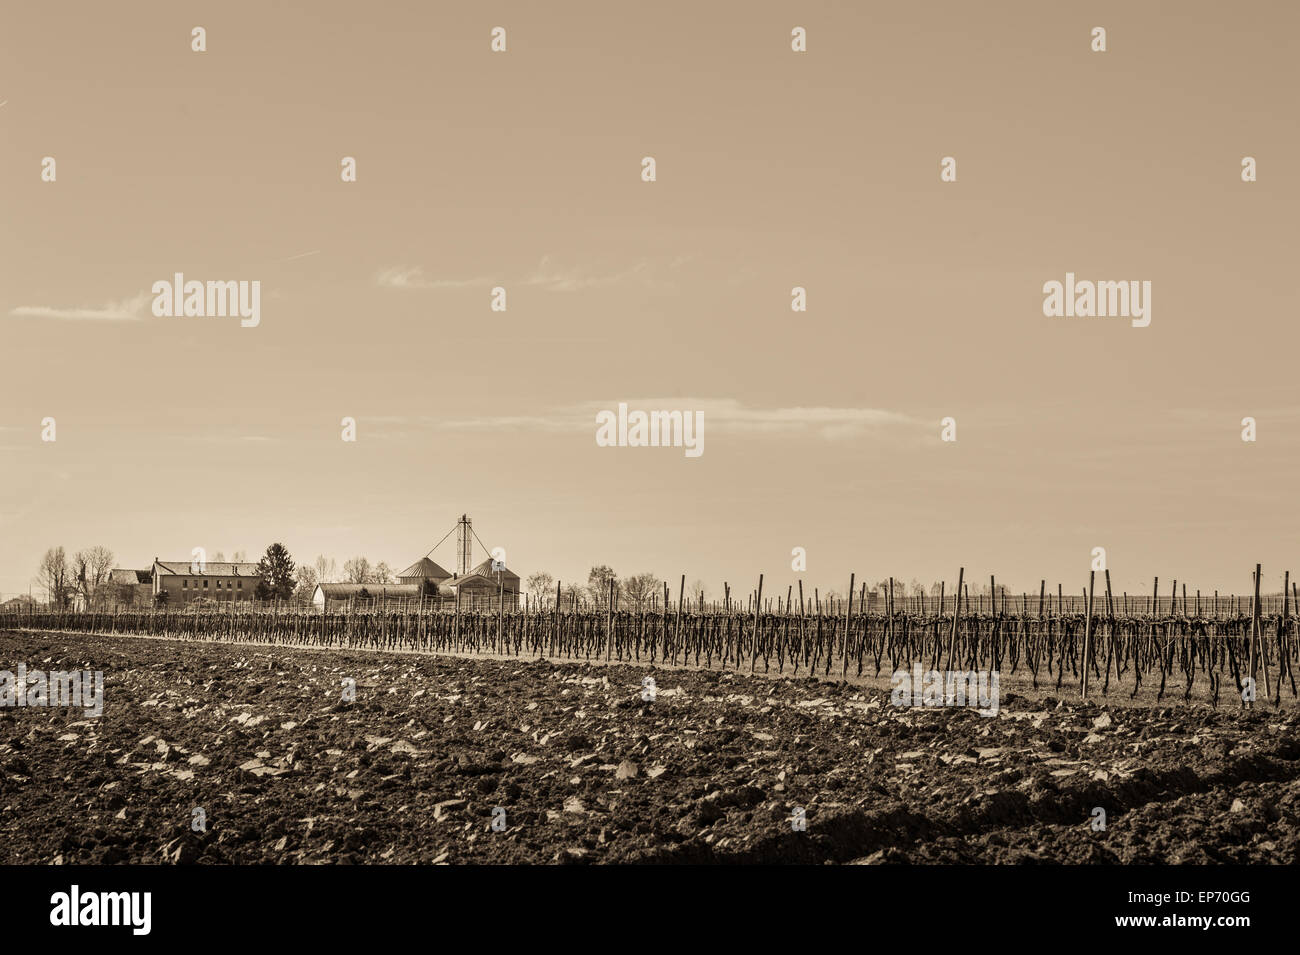 Effect vintage . Agricultural Landscape with vineyard and farm house in the background Stock Photo